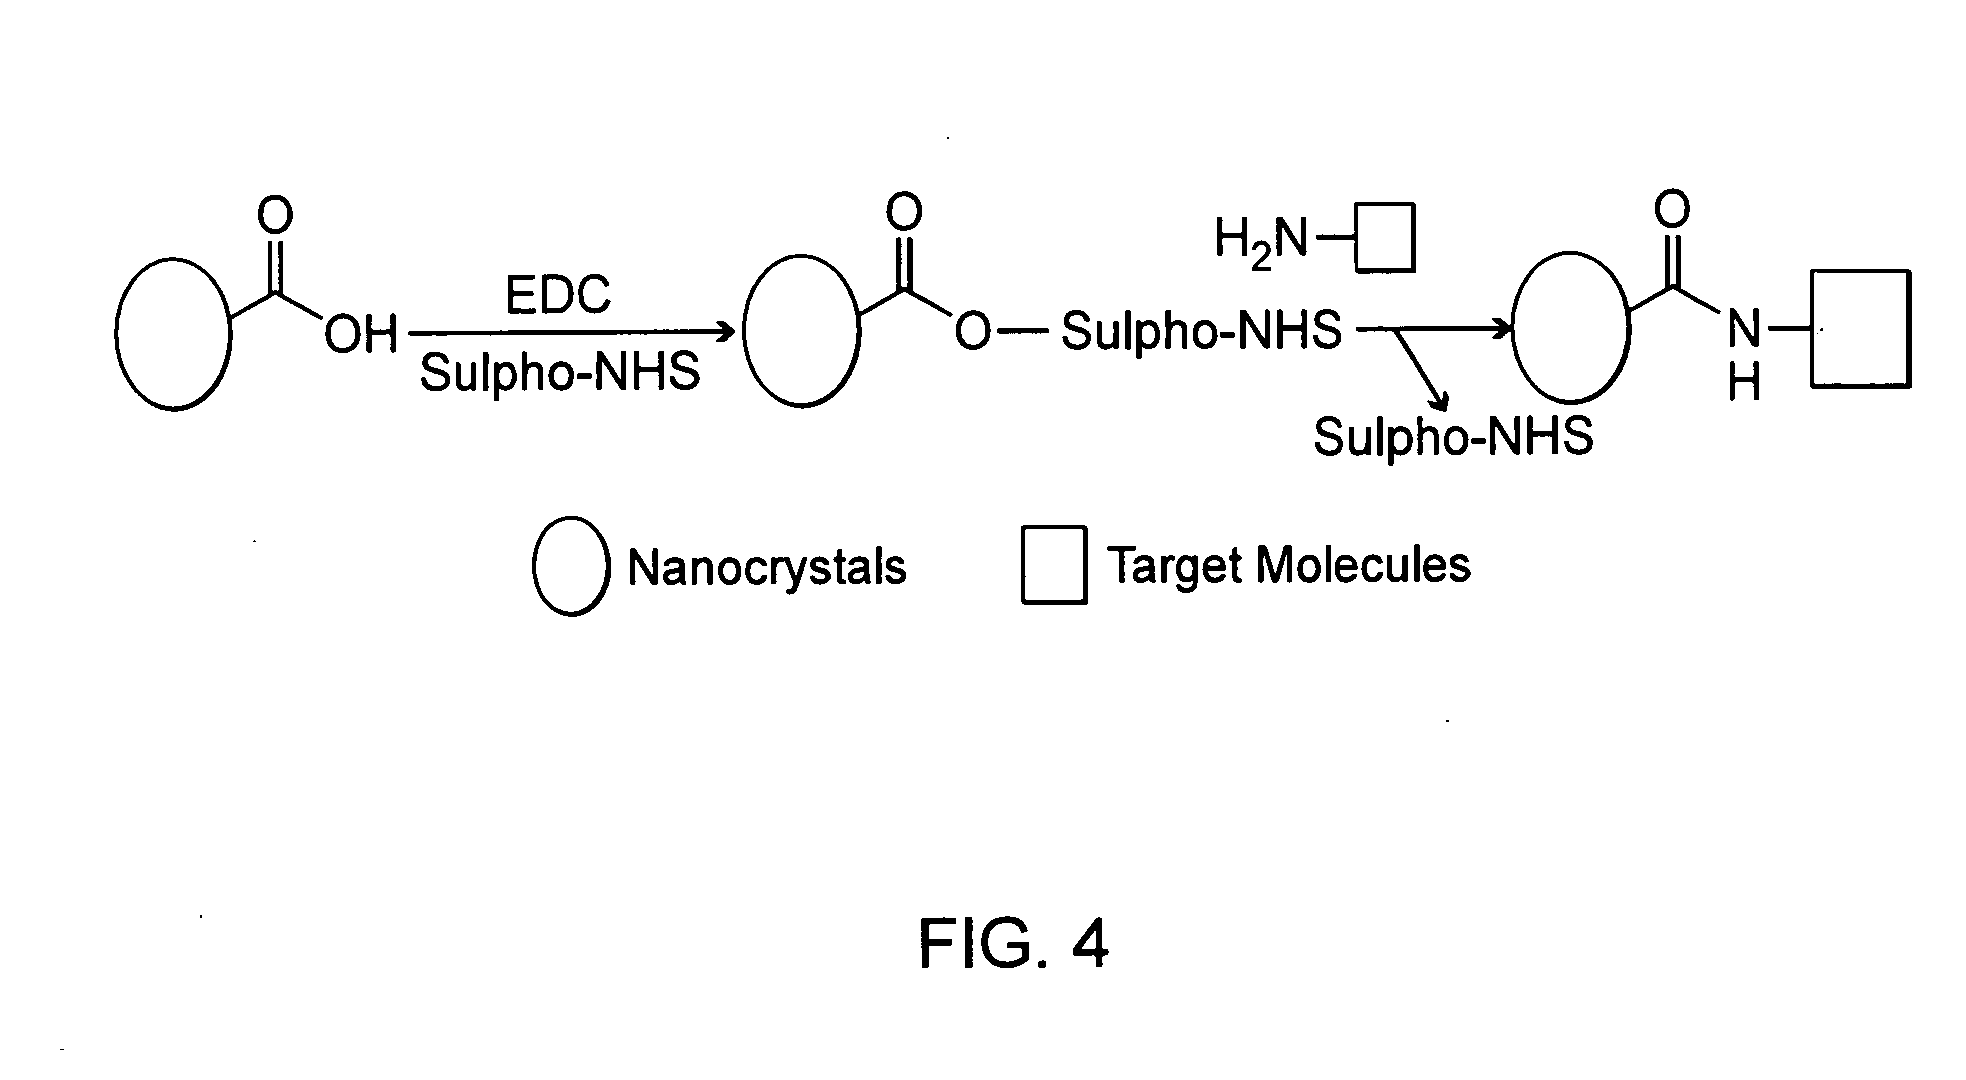 Water-stable III-V semiconductor nanocrystal complexes and methods of making same